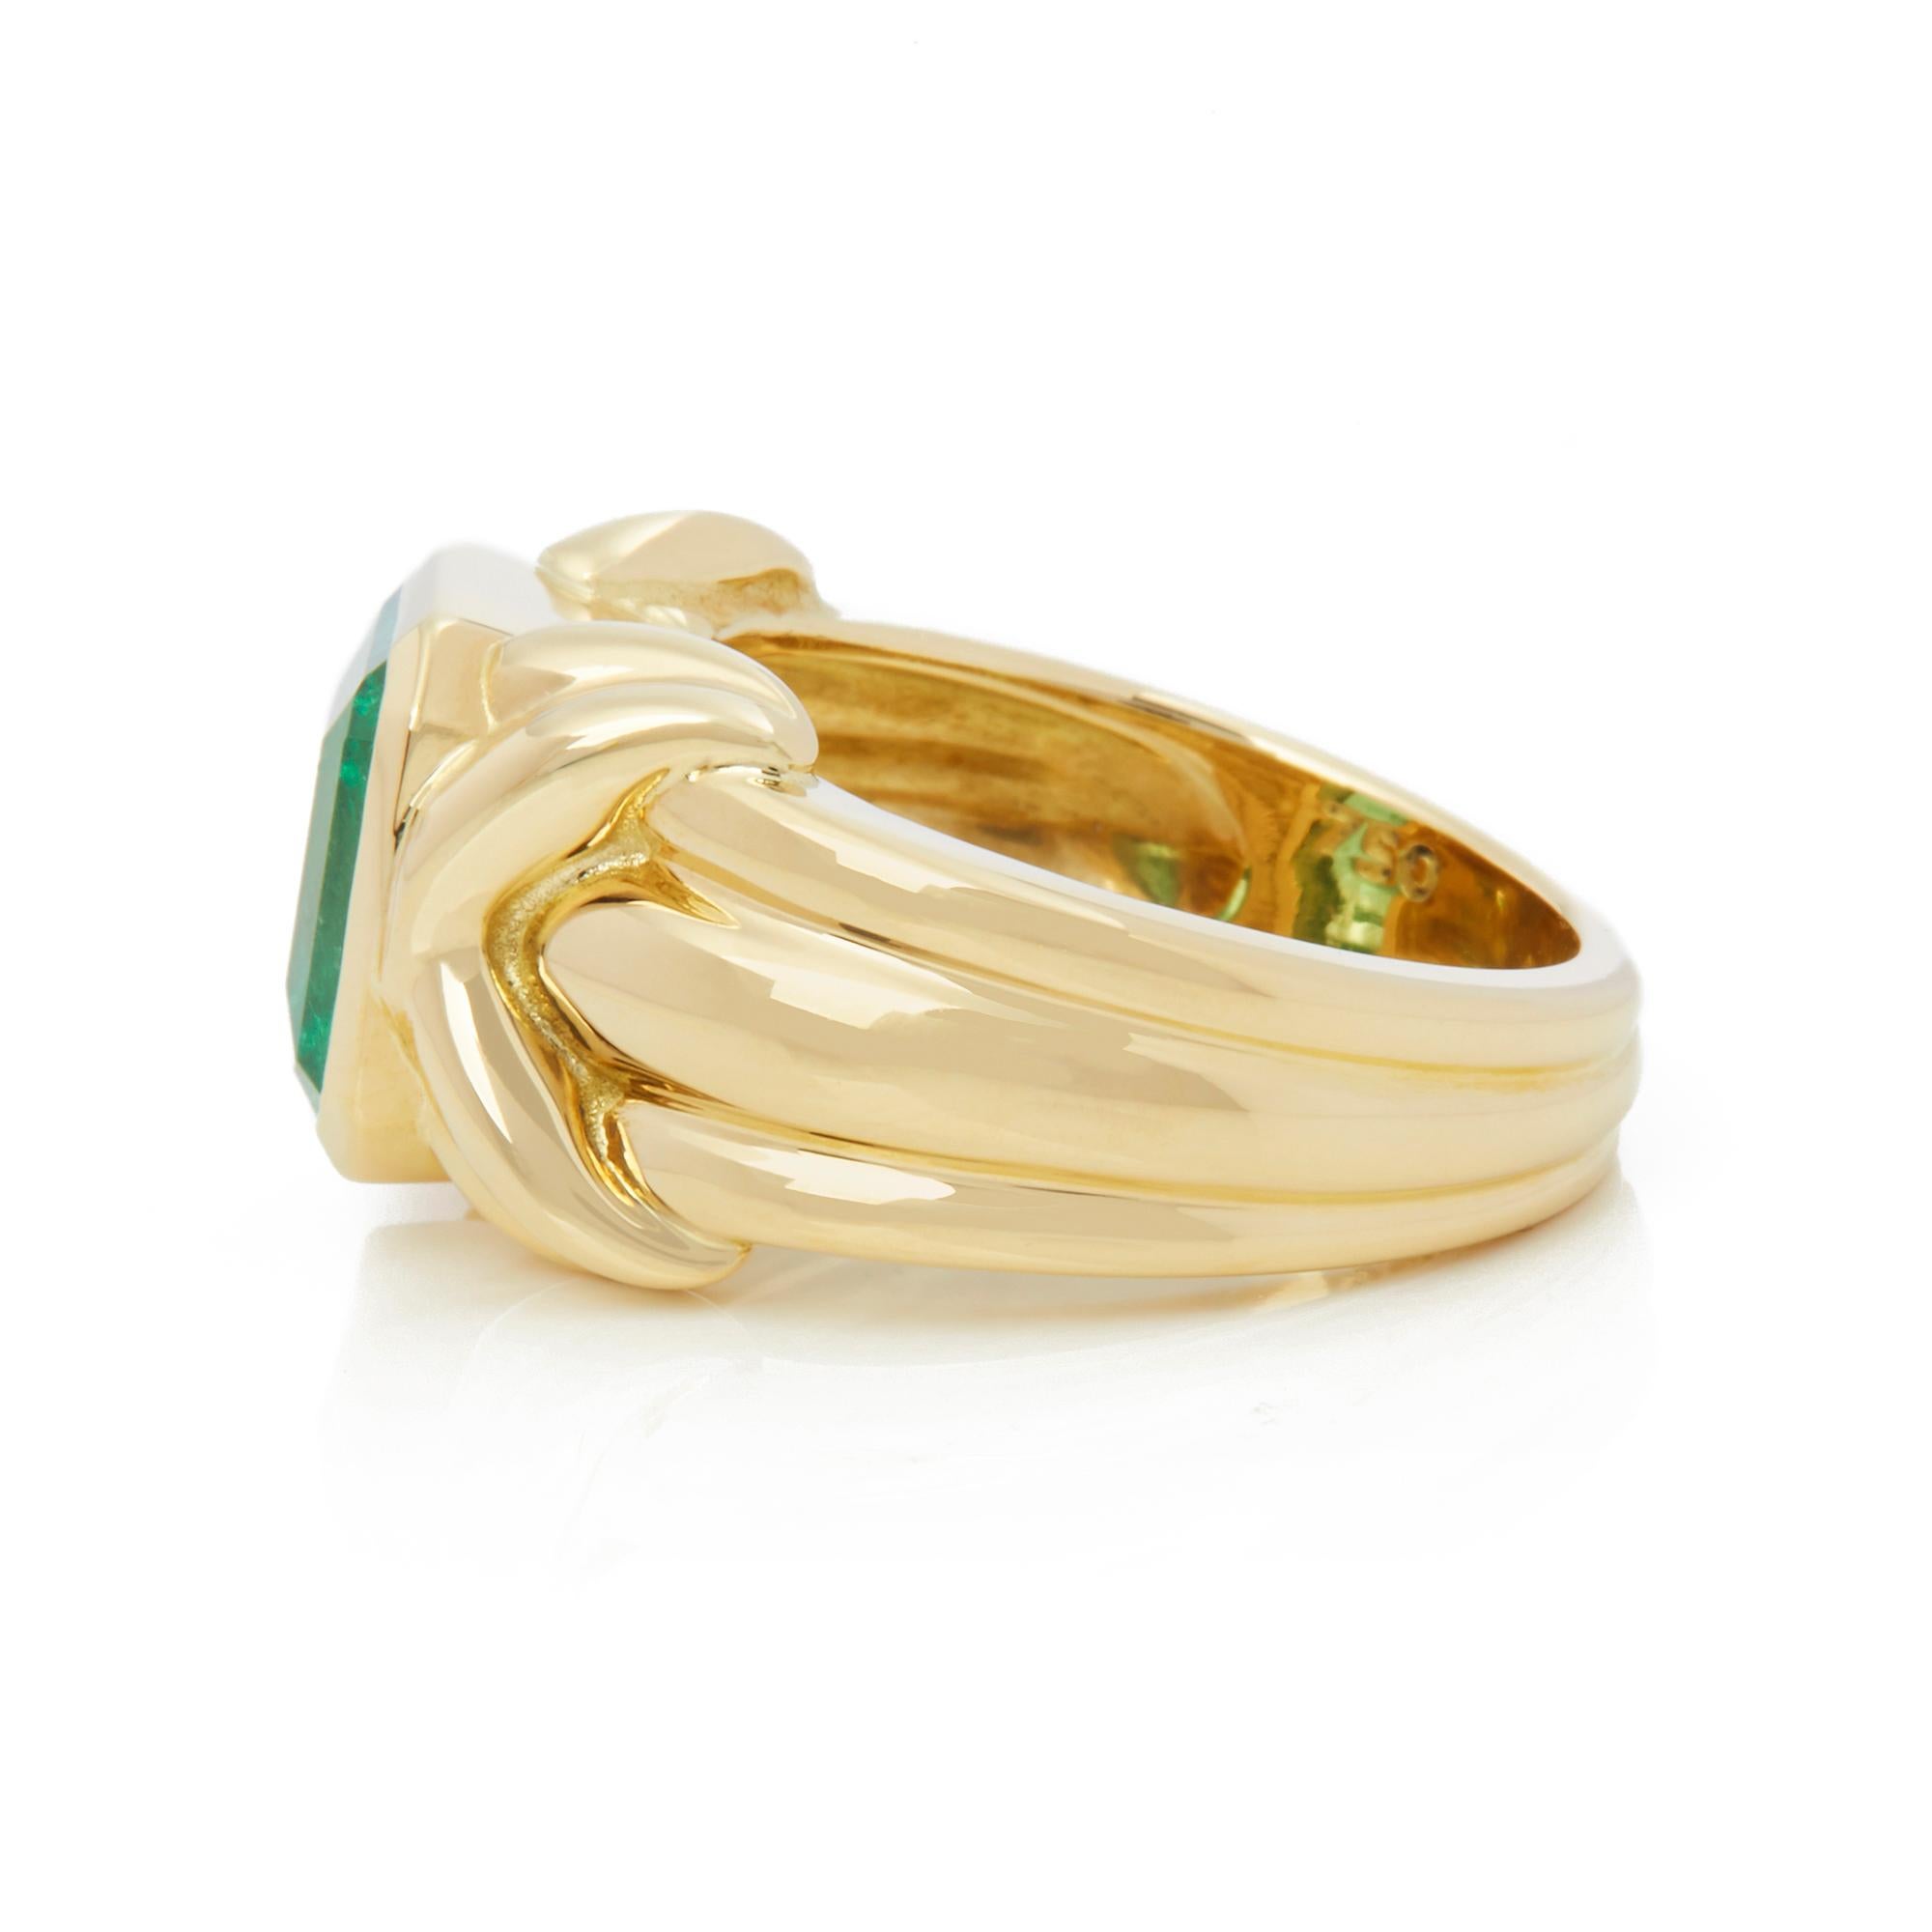 Tiffany & Co. 18 Karat Yellow Gold Colombian Emerald Cocktail Ring 2